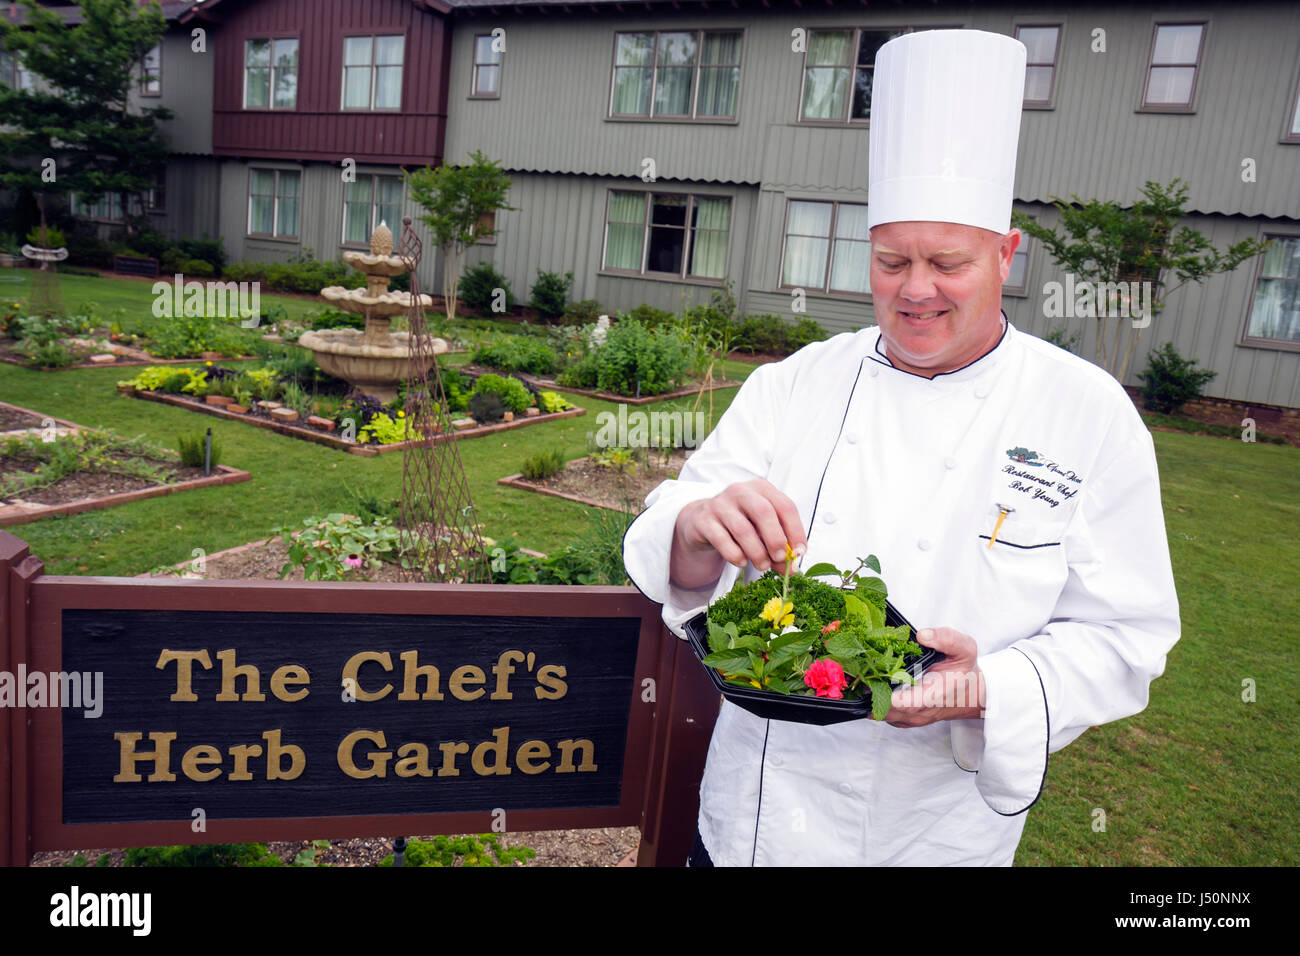 Alabama Point Clear,Grand Hotel Marriott Resort,hotel,Chef's Herb Garden,sign,man men male adult adults,cooking,food,organic,AL080523037 Stock Photo